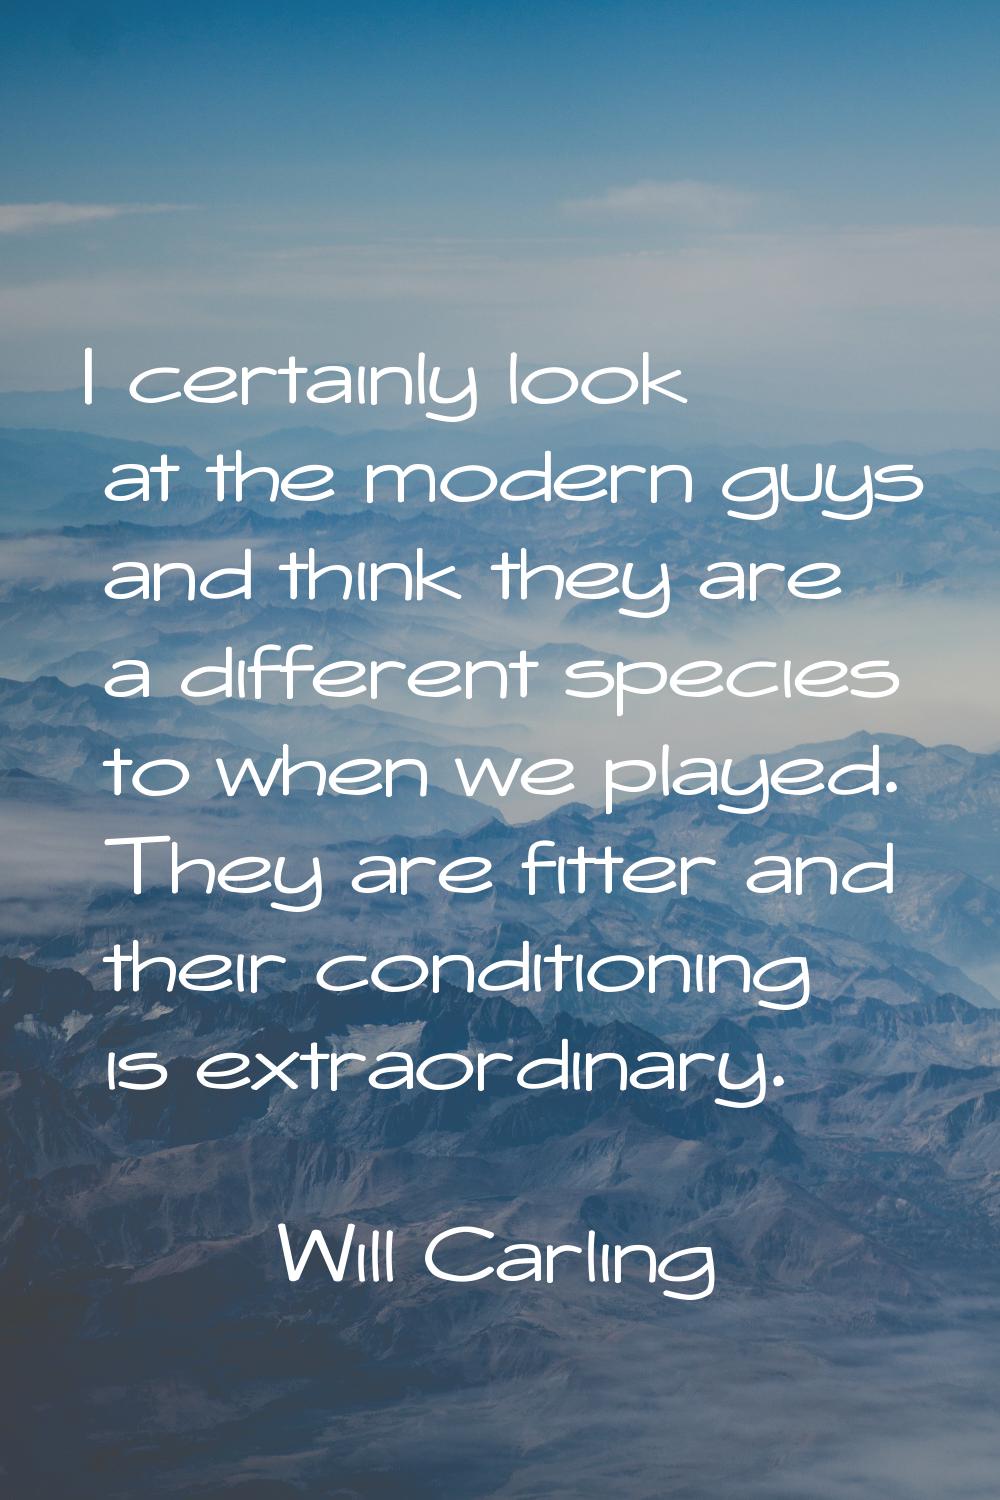 I certainly look at the modern guys and think they are a different species to when we played. They 